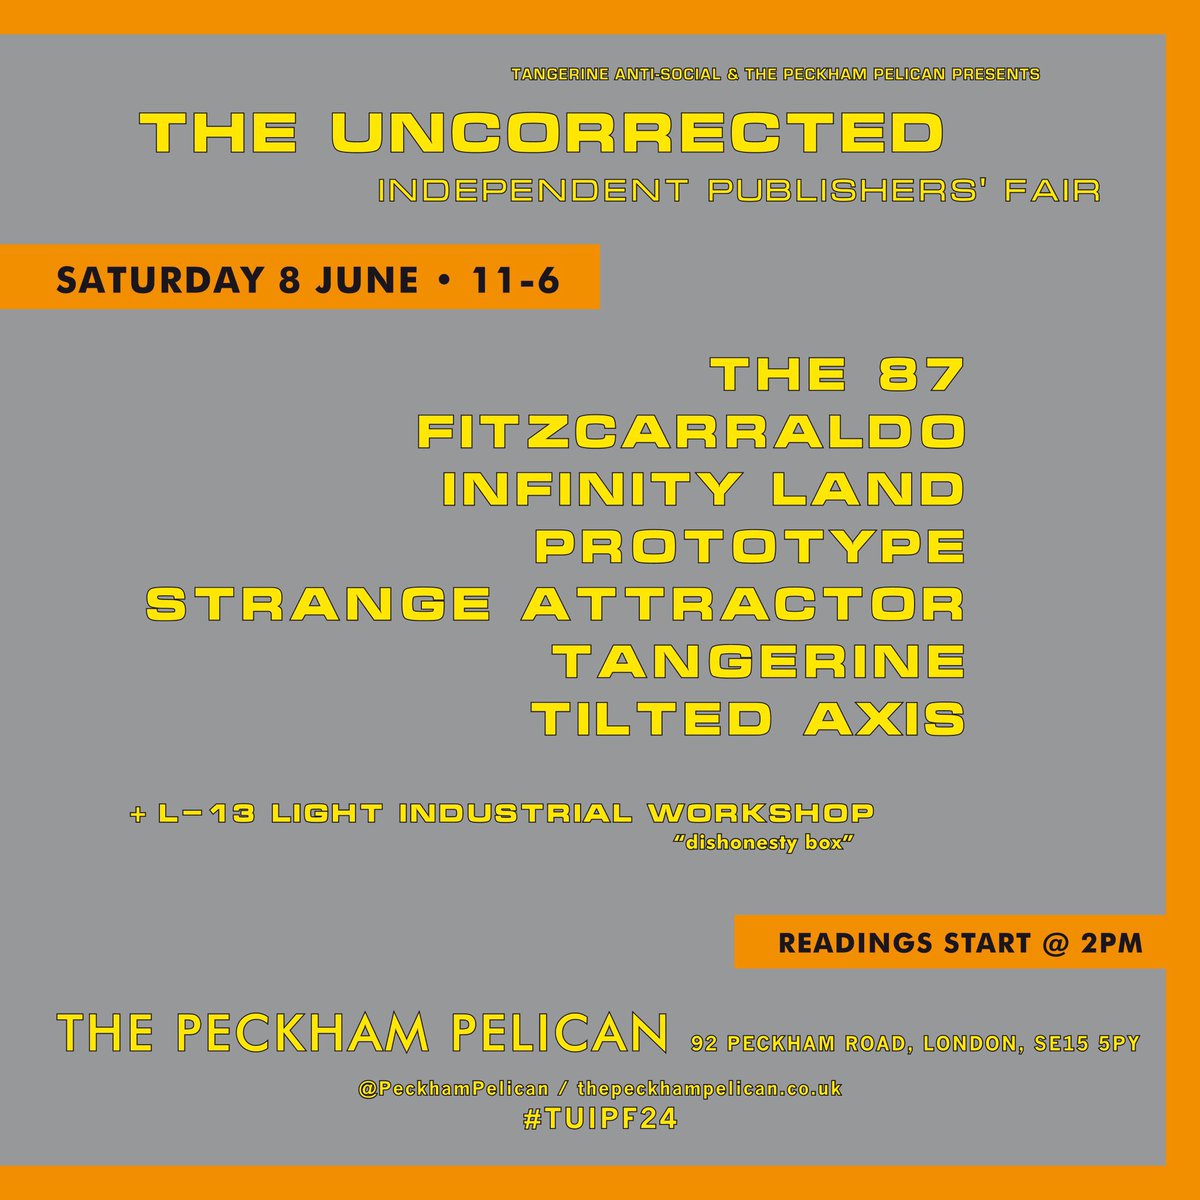 See you at ⚔️The Uncorrected Independent Publishers’ Fair ⚔️, part of @CamberwellArts Festival. We’ll be there with: @the87press @FitzcarraldoEds Infinity Land @strangepress @TangerinePress @prototypepubs Readings from 2pm 📆 Sat 8 June ⏰ 11 - 6 📍@PeckhamPelican #TUIPF24